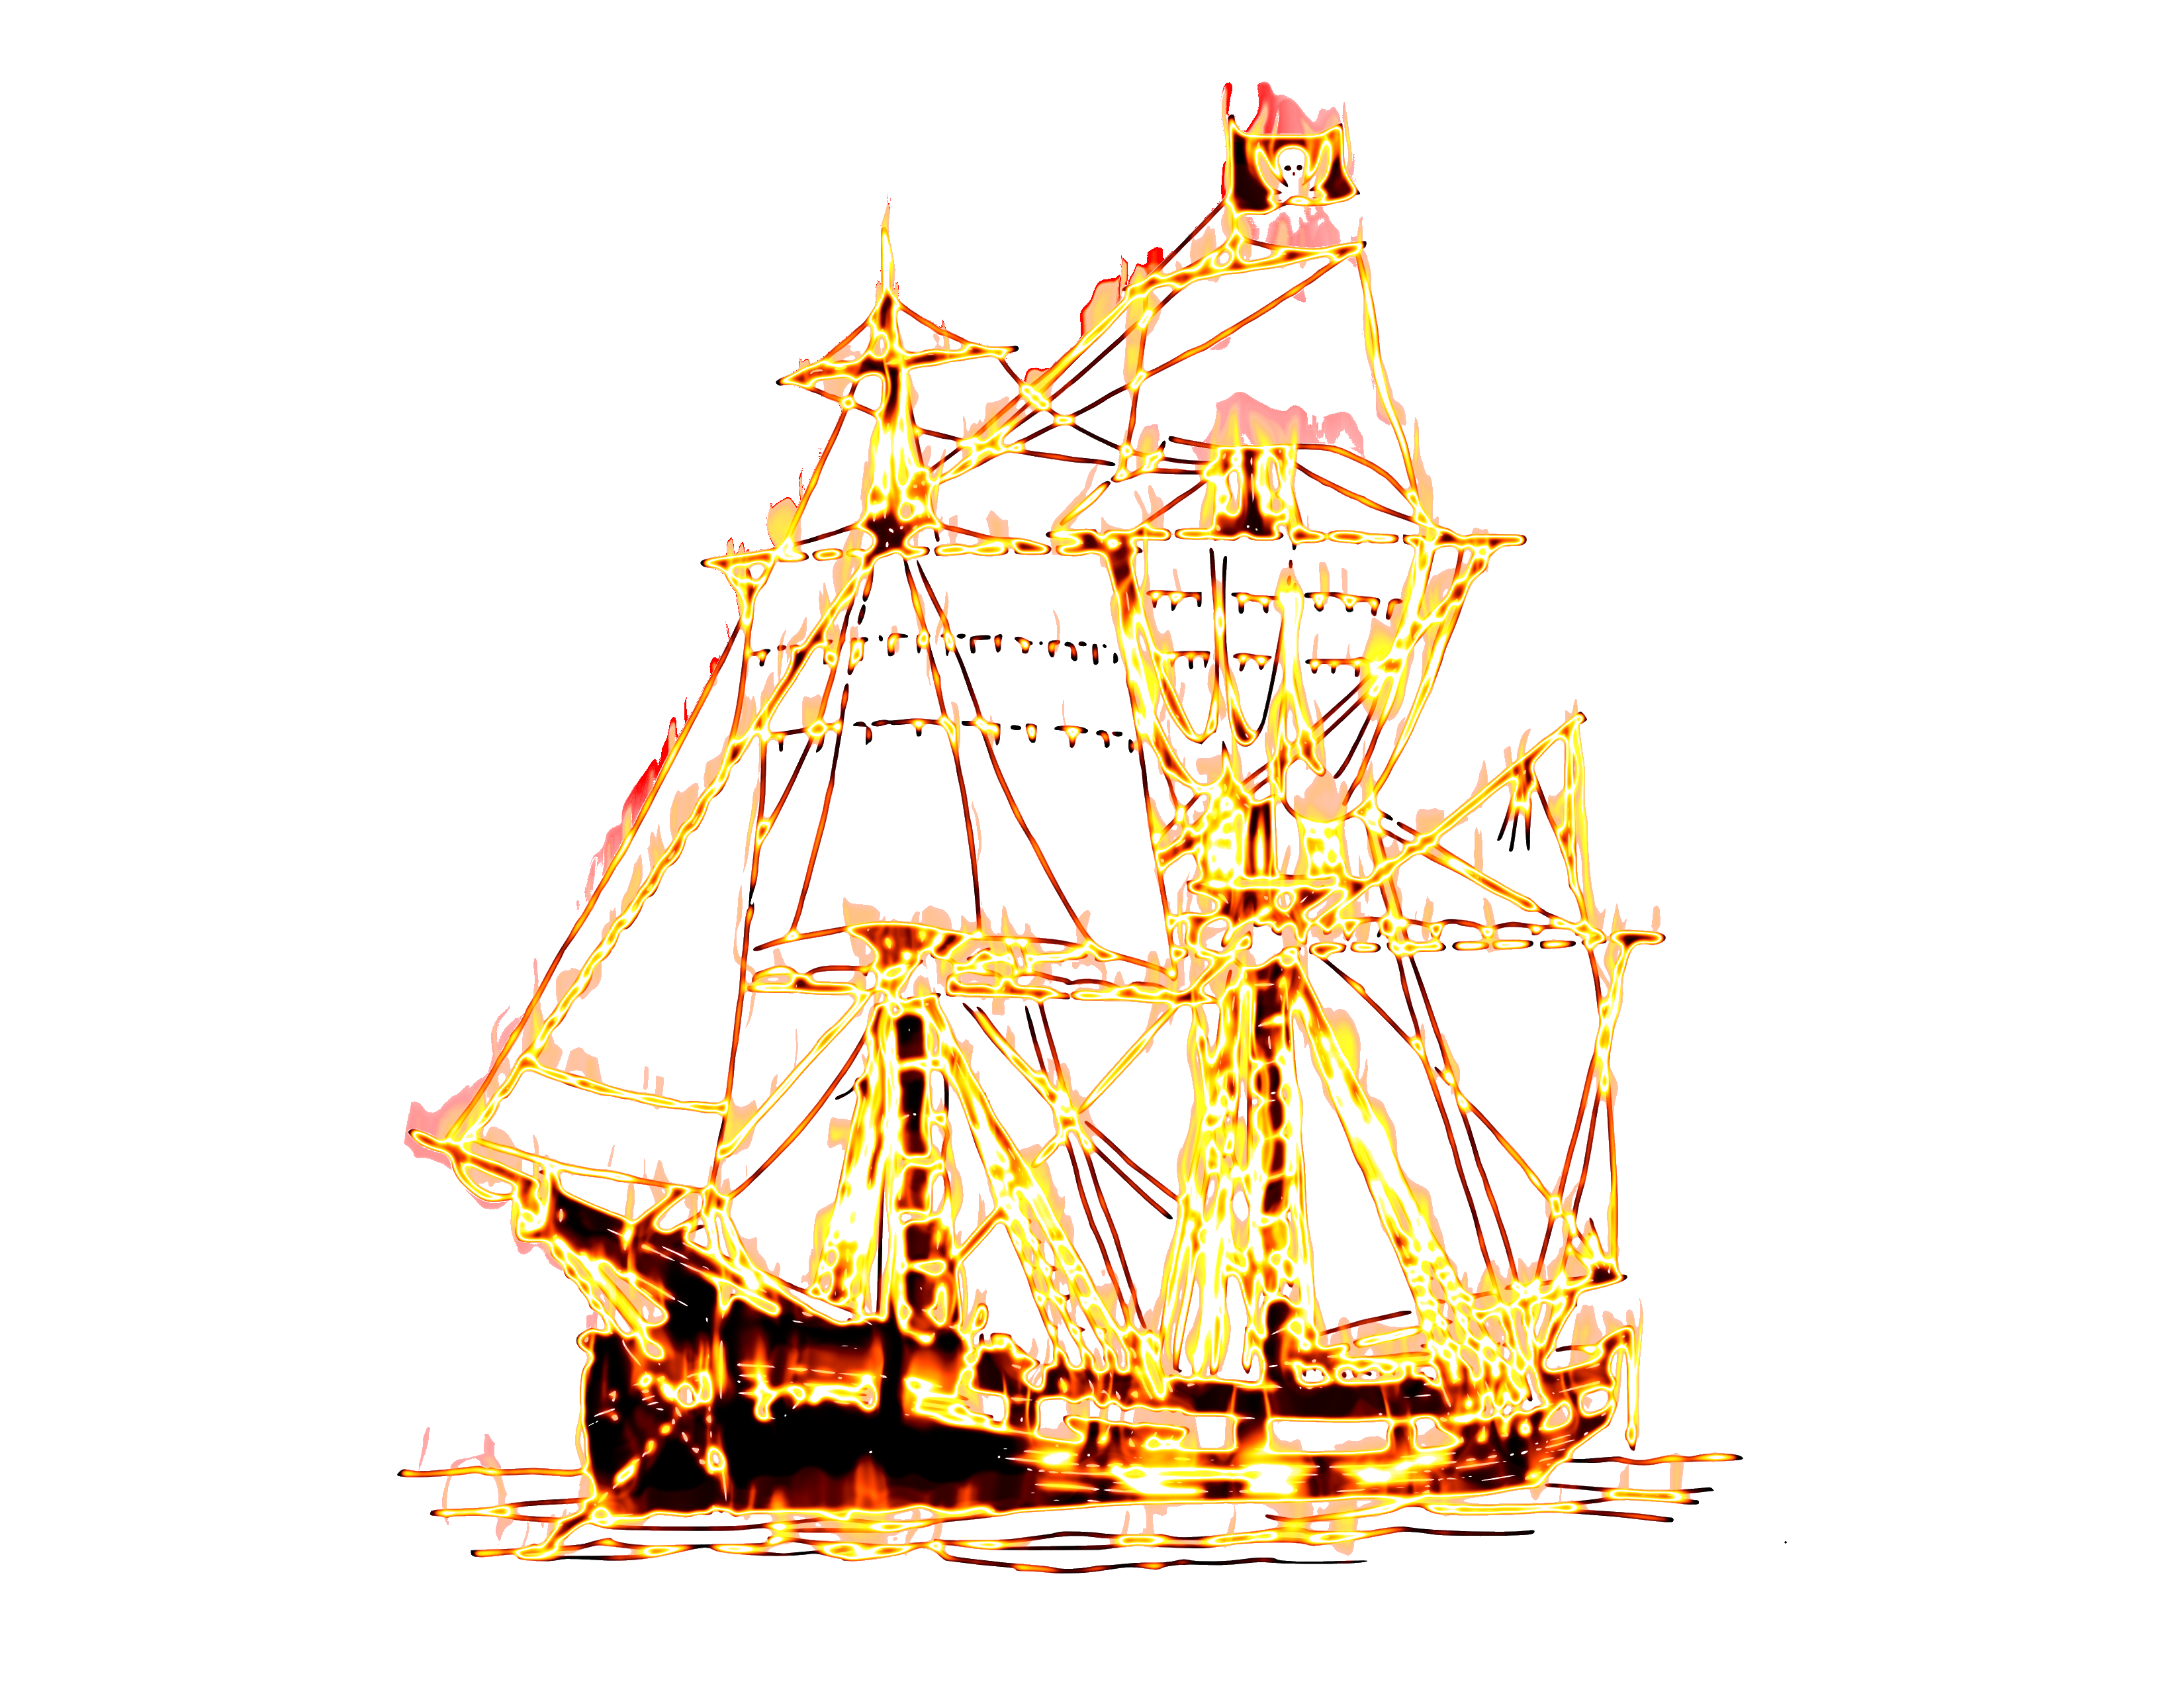 Clipart boat fire. Pirate and images ship